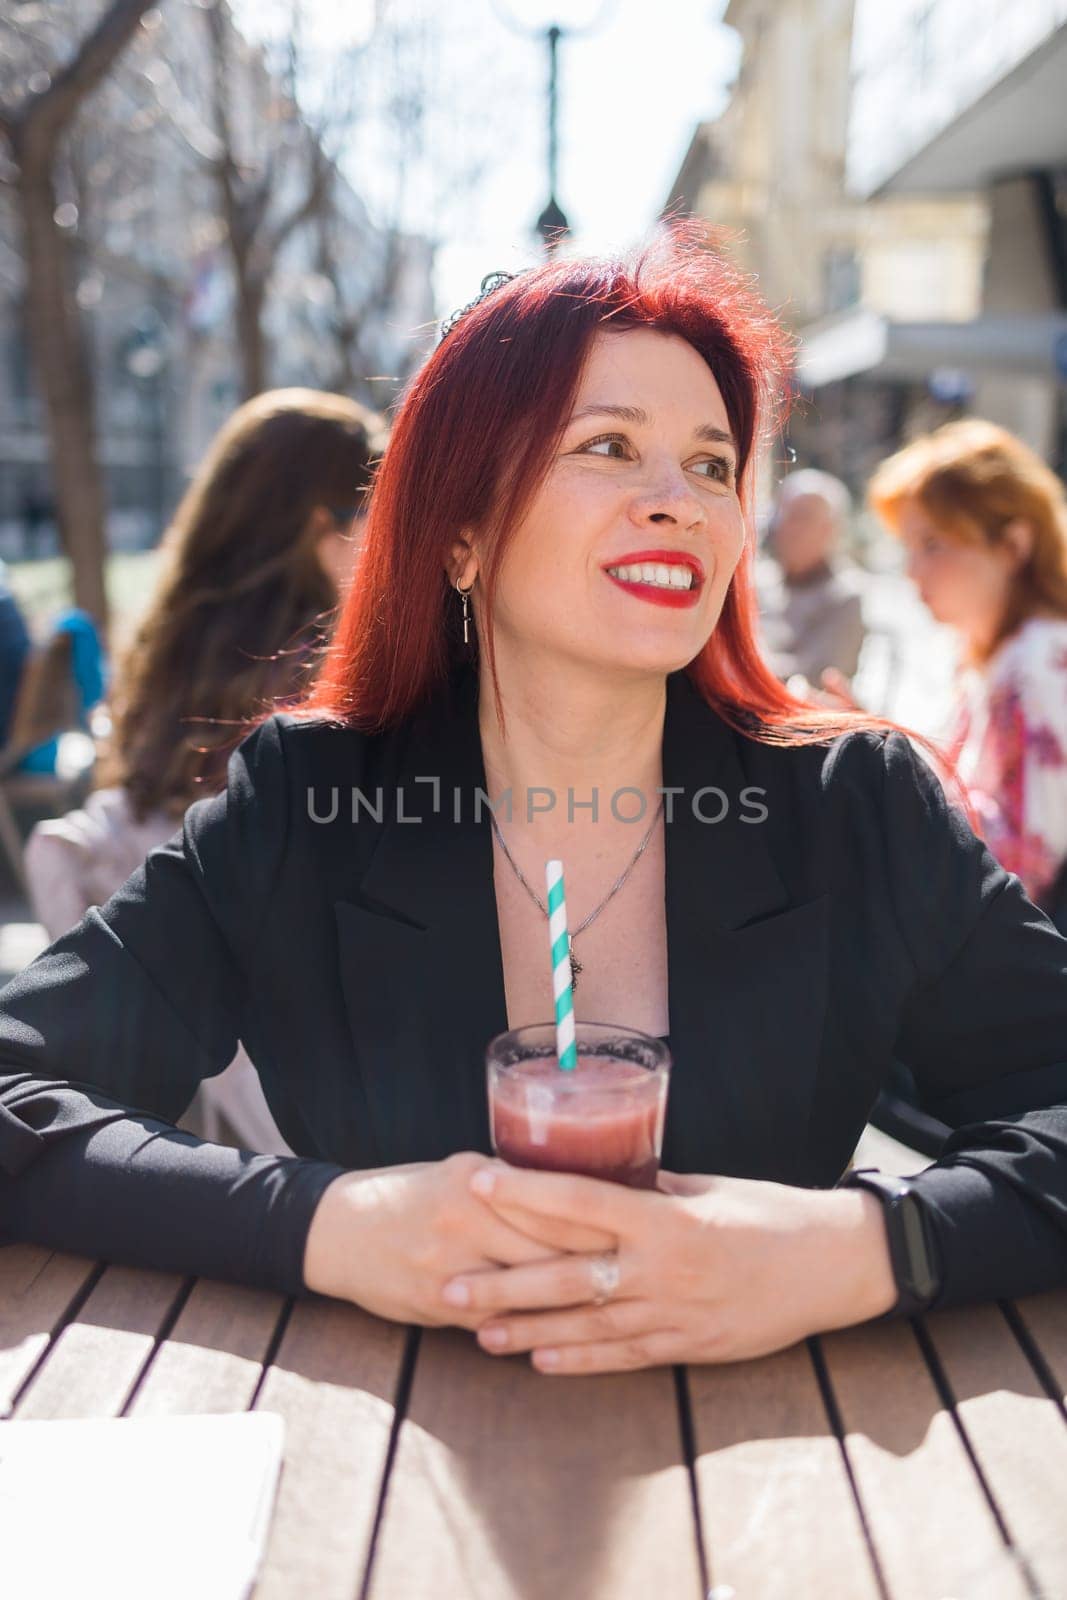 Beautiful happy woman with long red hair enjoying cocktail in a street cafe by Satura86